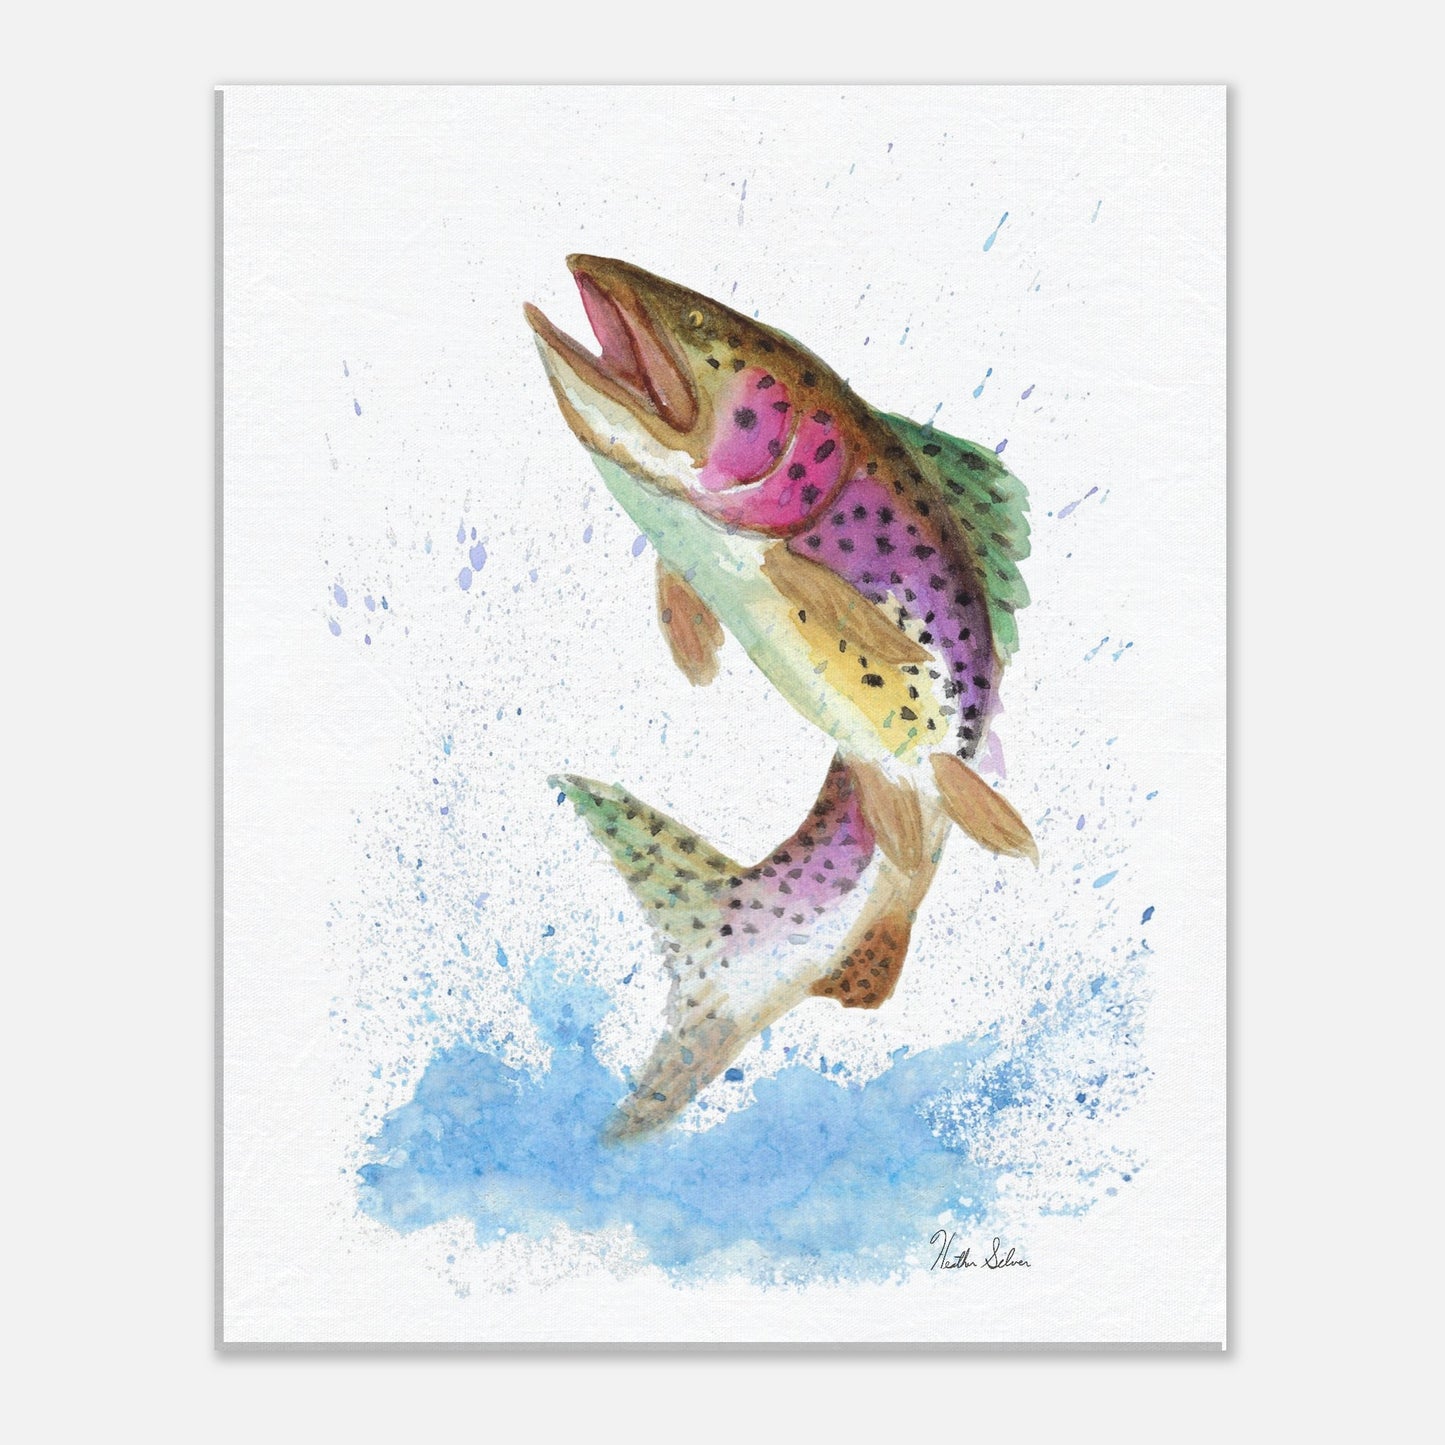 12 by 16 inch slim canvas wall art print featuring a watercolor painting of a rainbow trout leaping from the water. Hanging hardware included.